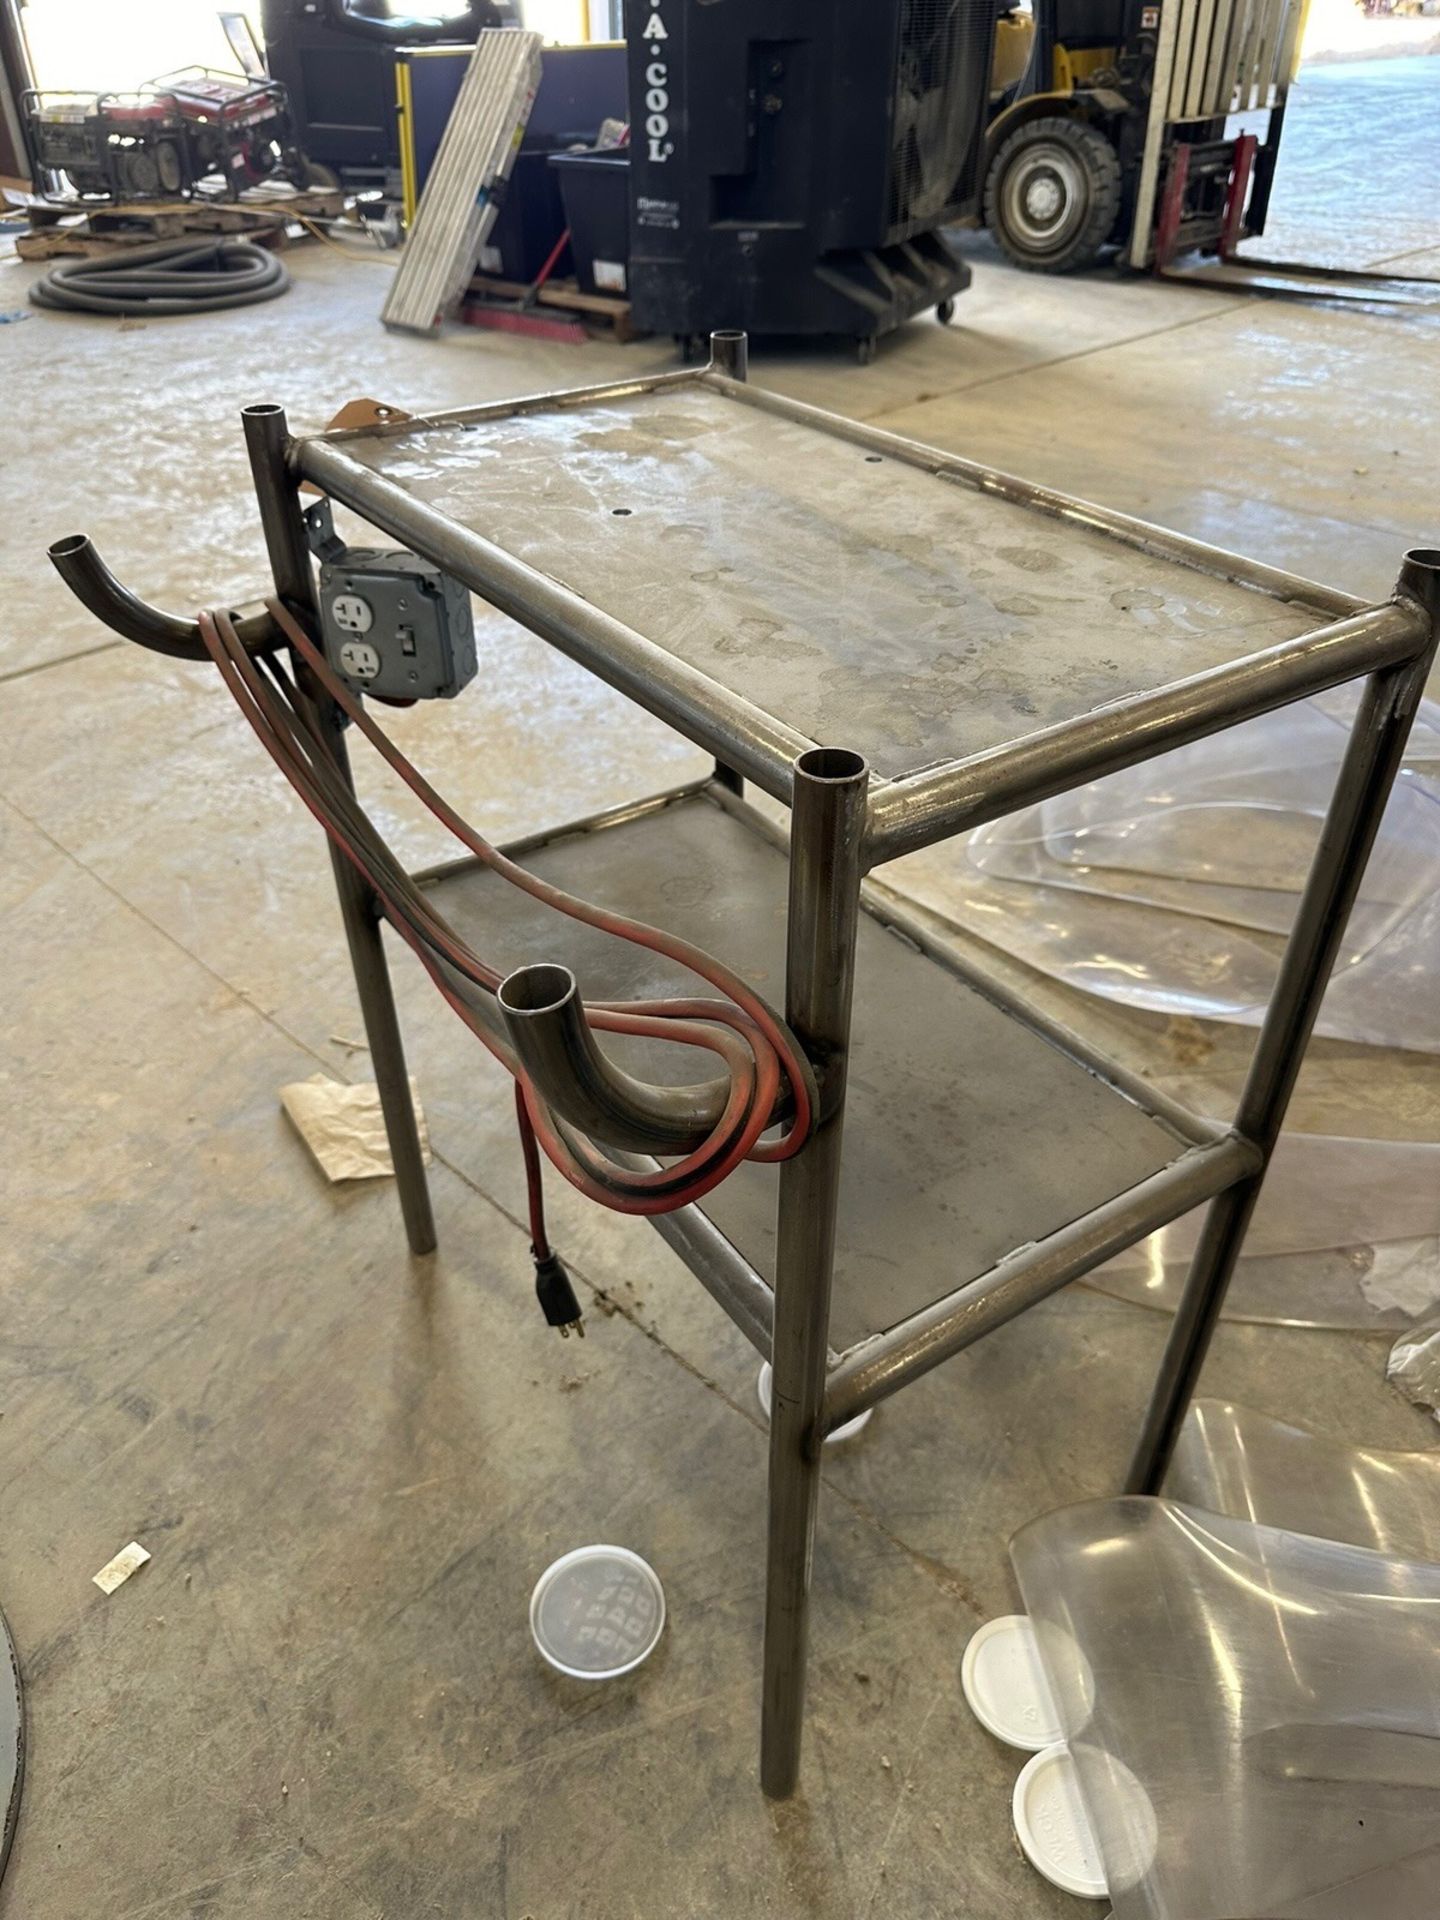 Stainless Steel Workbench With Outlets | Rig Fee $35 - Image 3 of 3